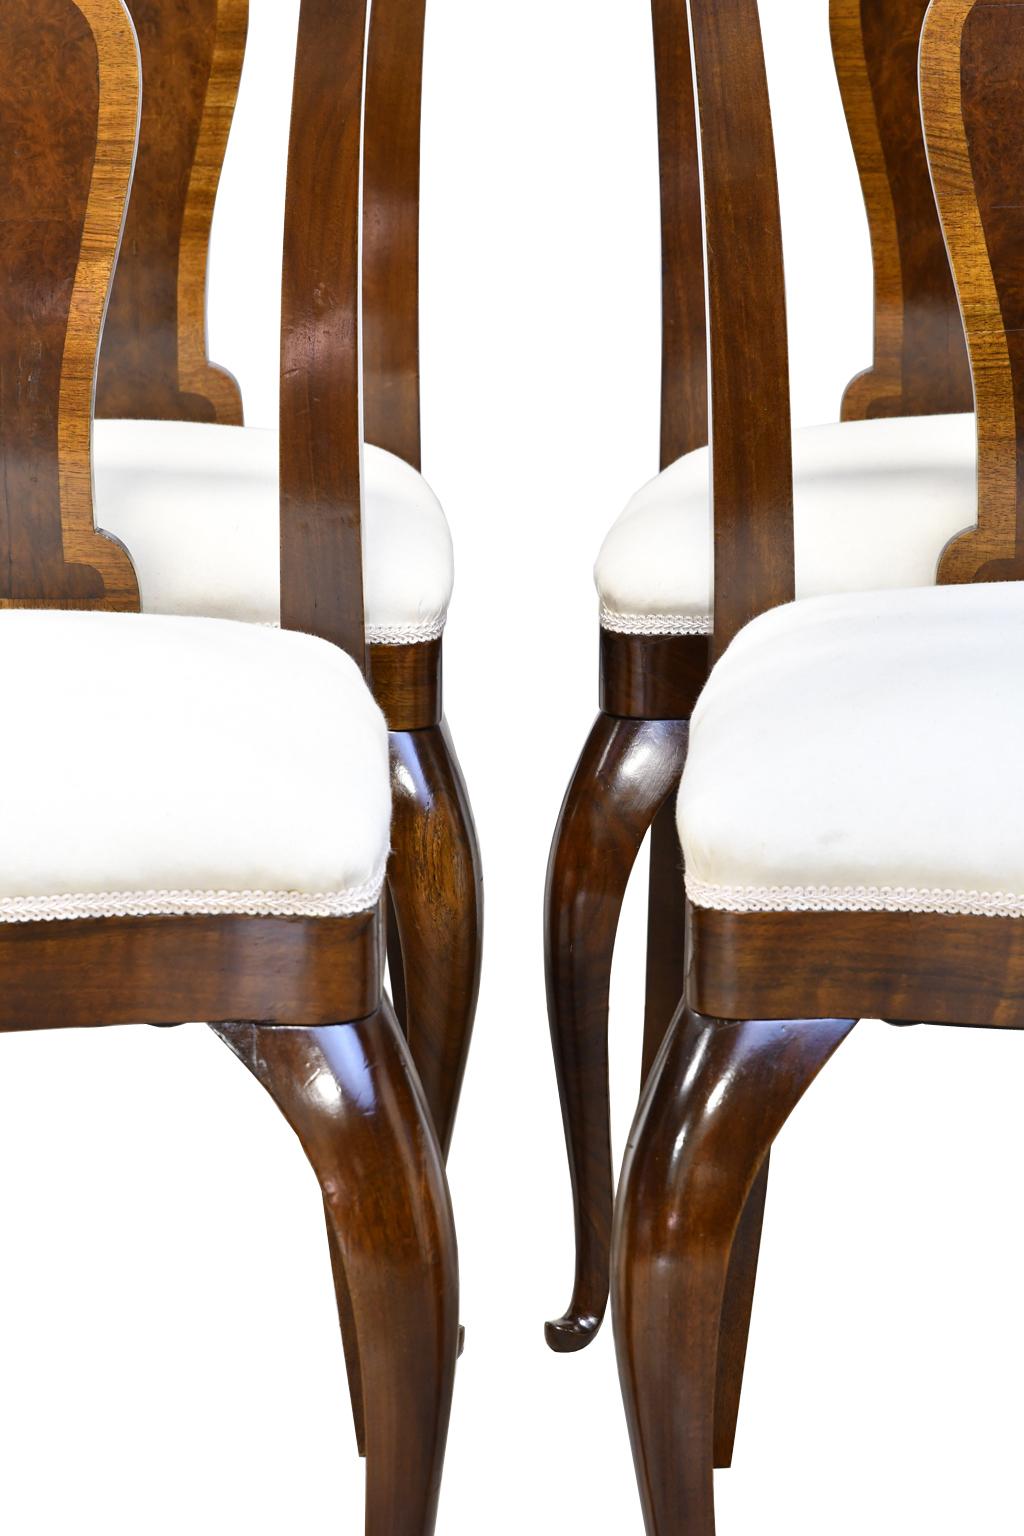 Set of four French Art Deco mahogany dining chairs with upholstered seats, circa 1910-1920.
Frame of chair is mahogany, while the back splat is crossbanded in a flat cut walnut and veneered with burled walnut in the center.
Chairs are French